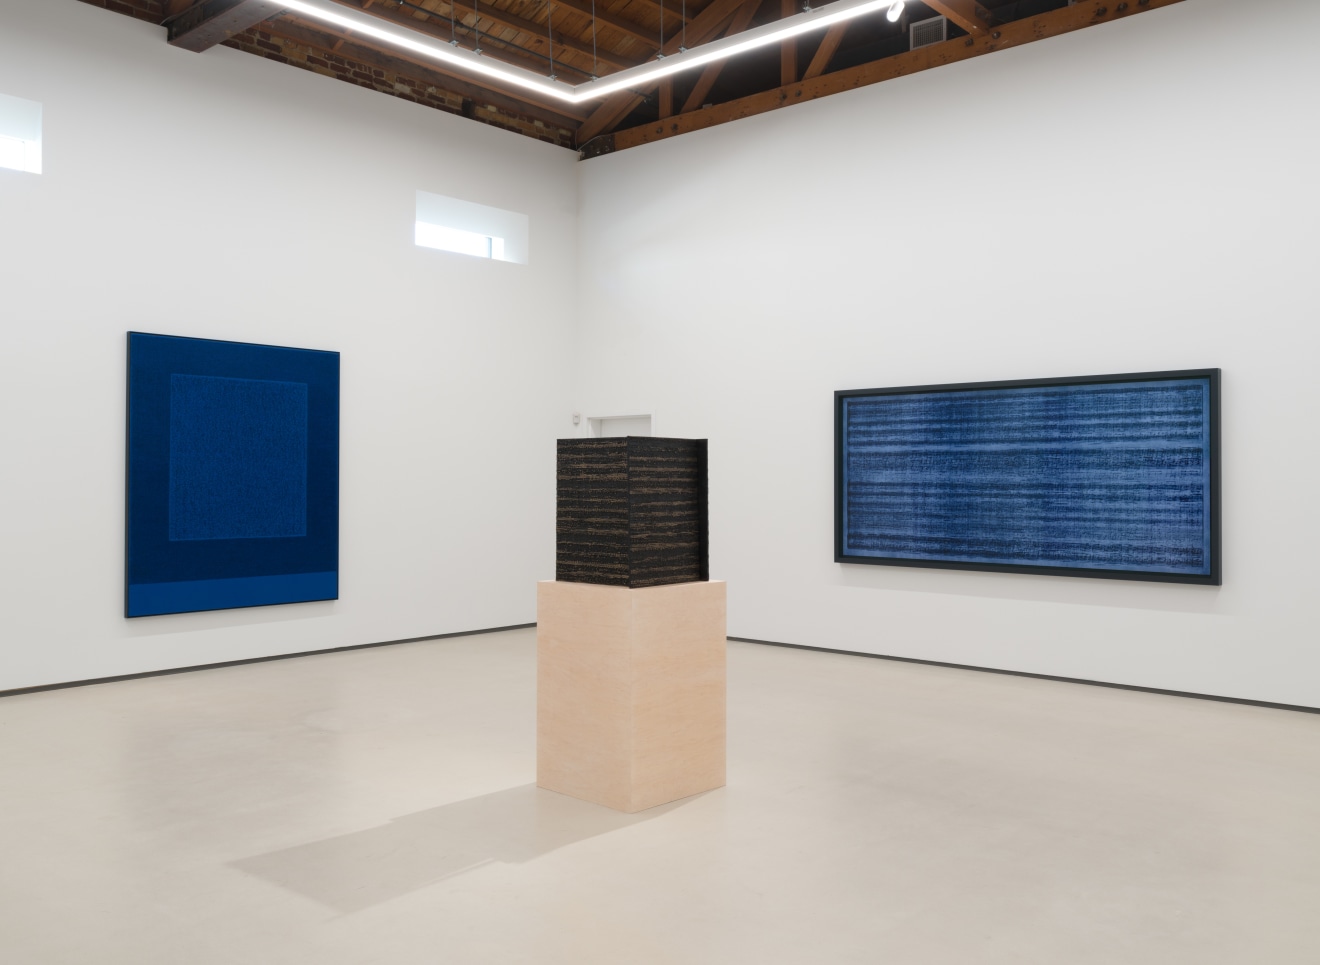 Installation view of Idris Khan: The Pattern of Landscape at Sean Kelly, Los Angeles, September 17 - November 5, 2022, Photography: Jeff McLane, Courtesy: Sean Kelly